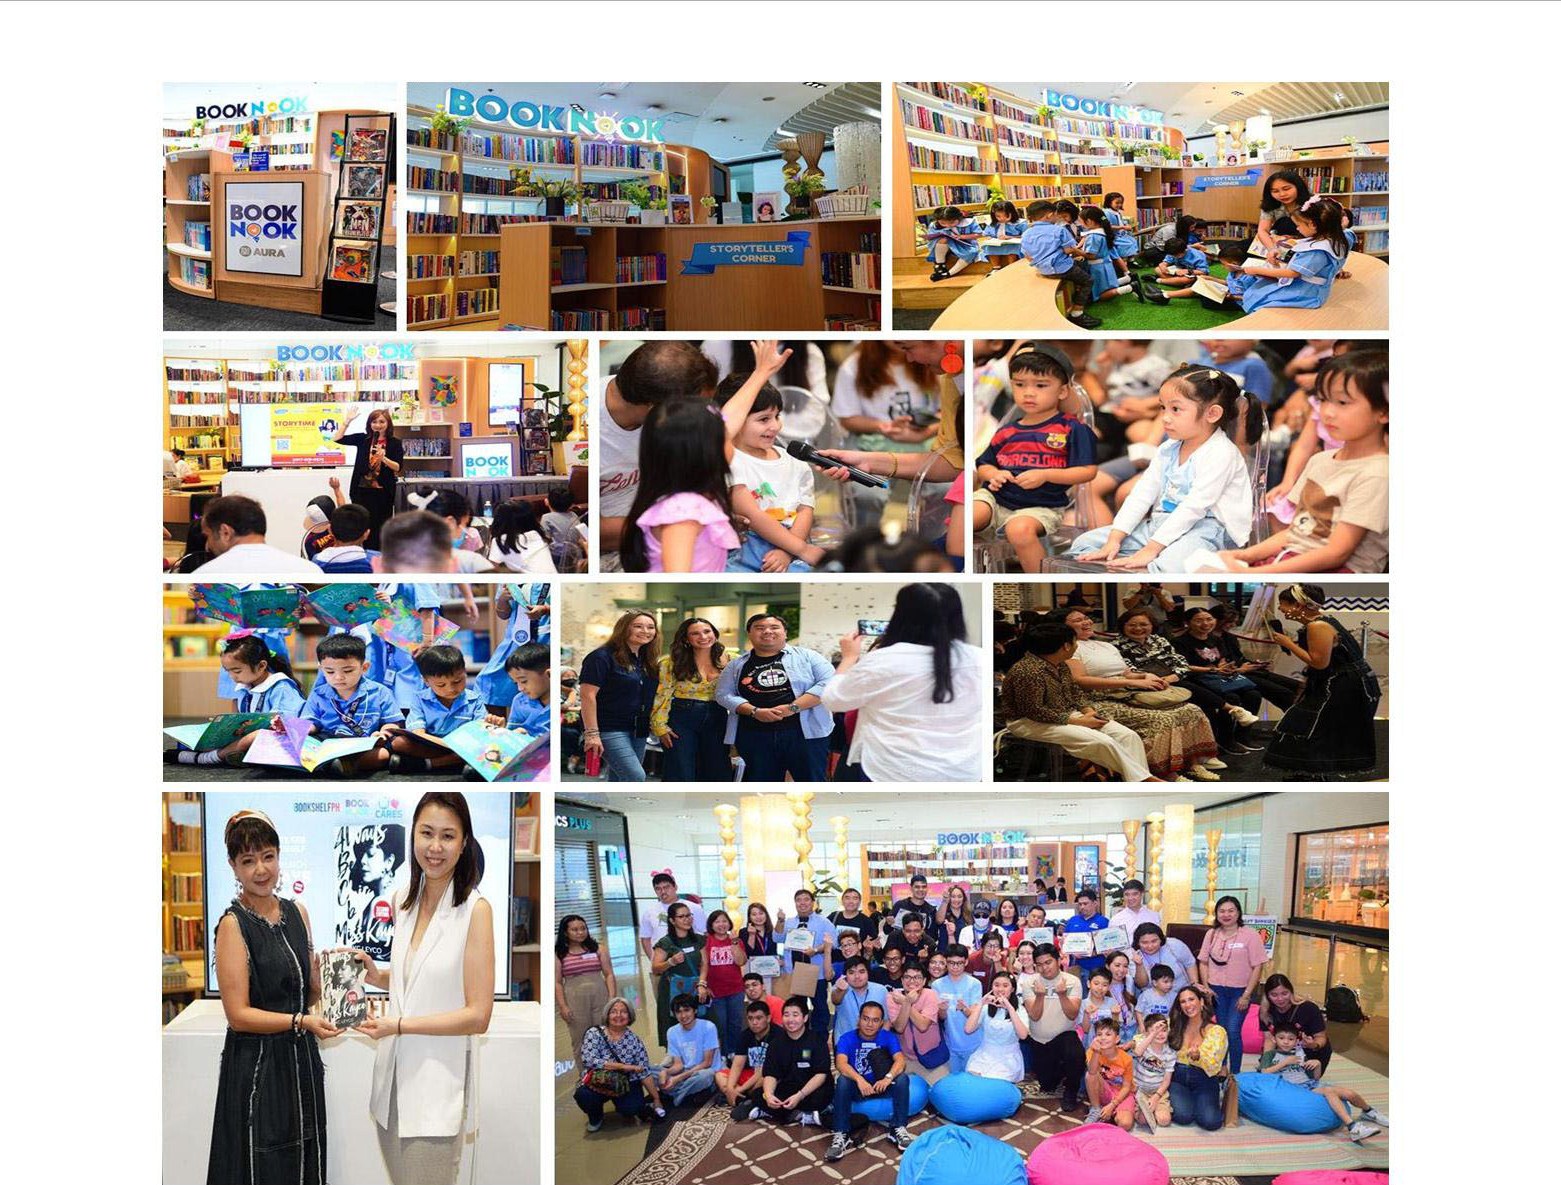 SM’s Book Nook strengthens Filipinos’ love for literature in celebration of National Literature Month